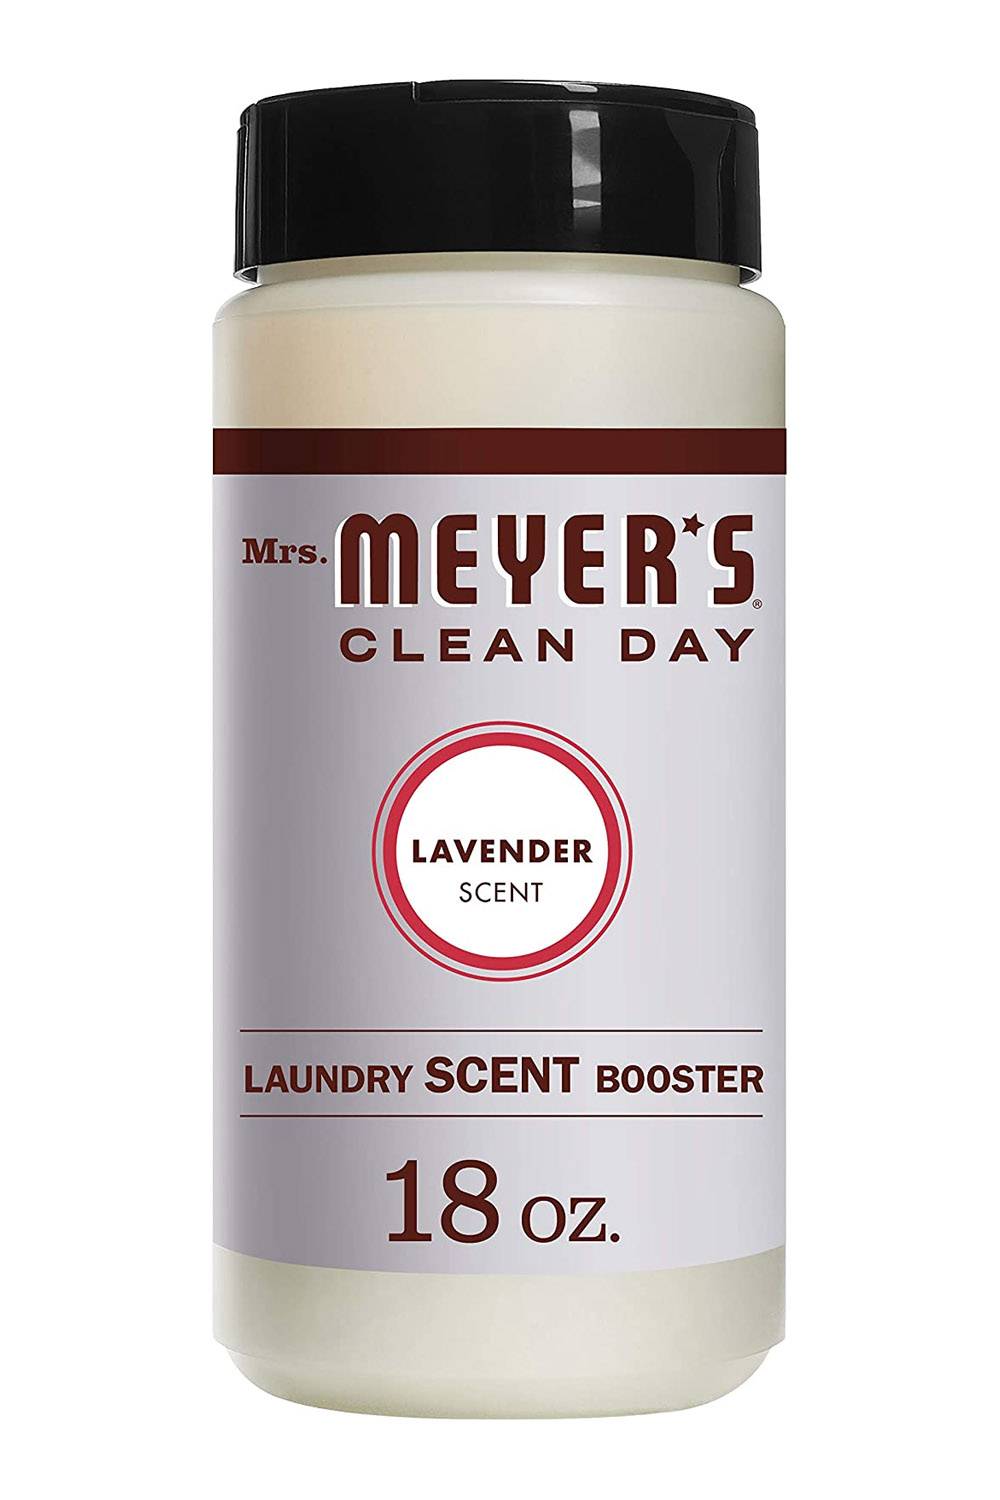 mrs meyers laundry scent booster